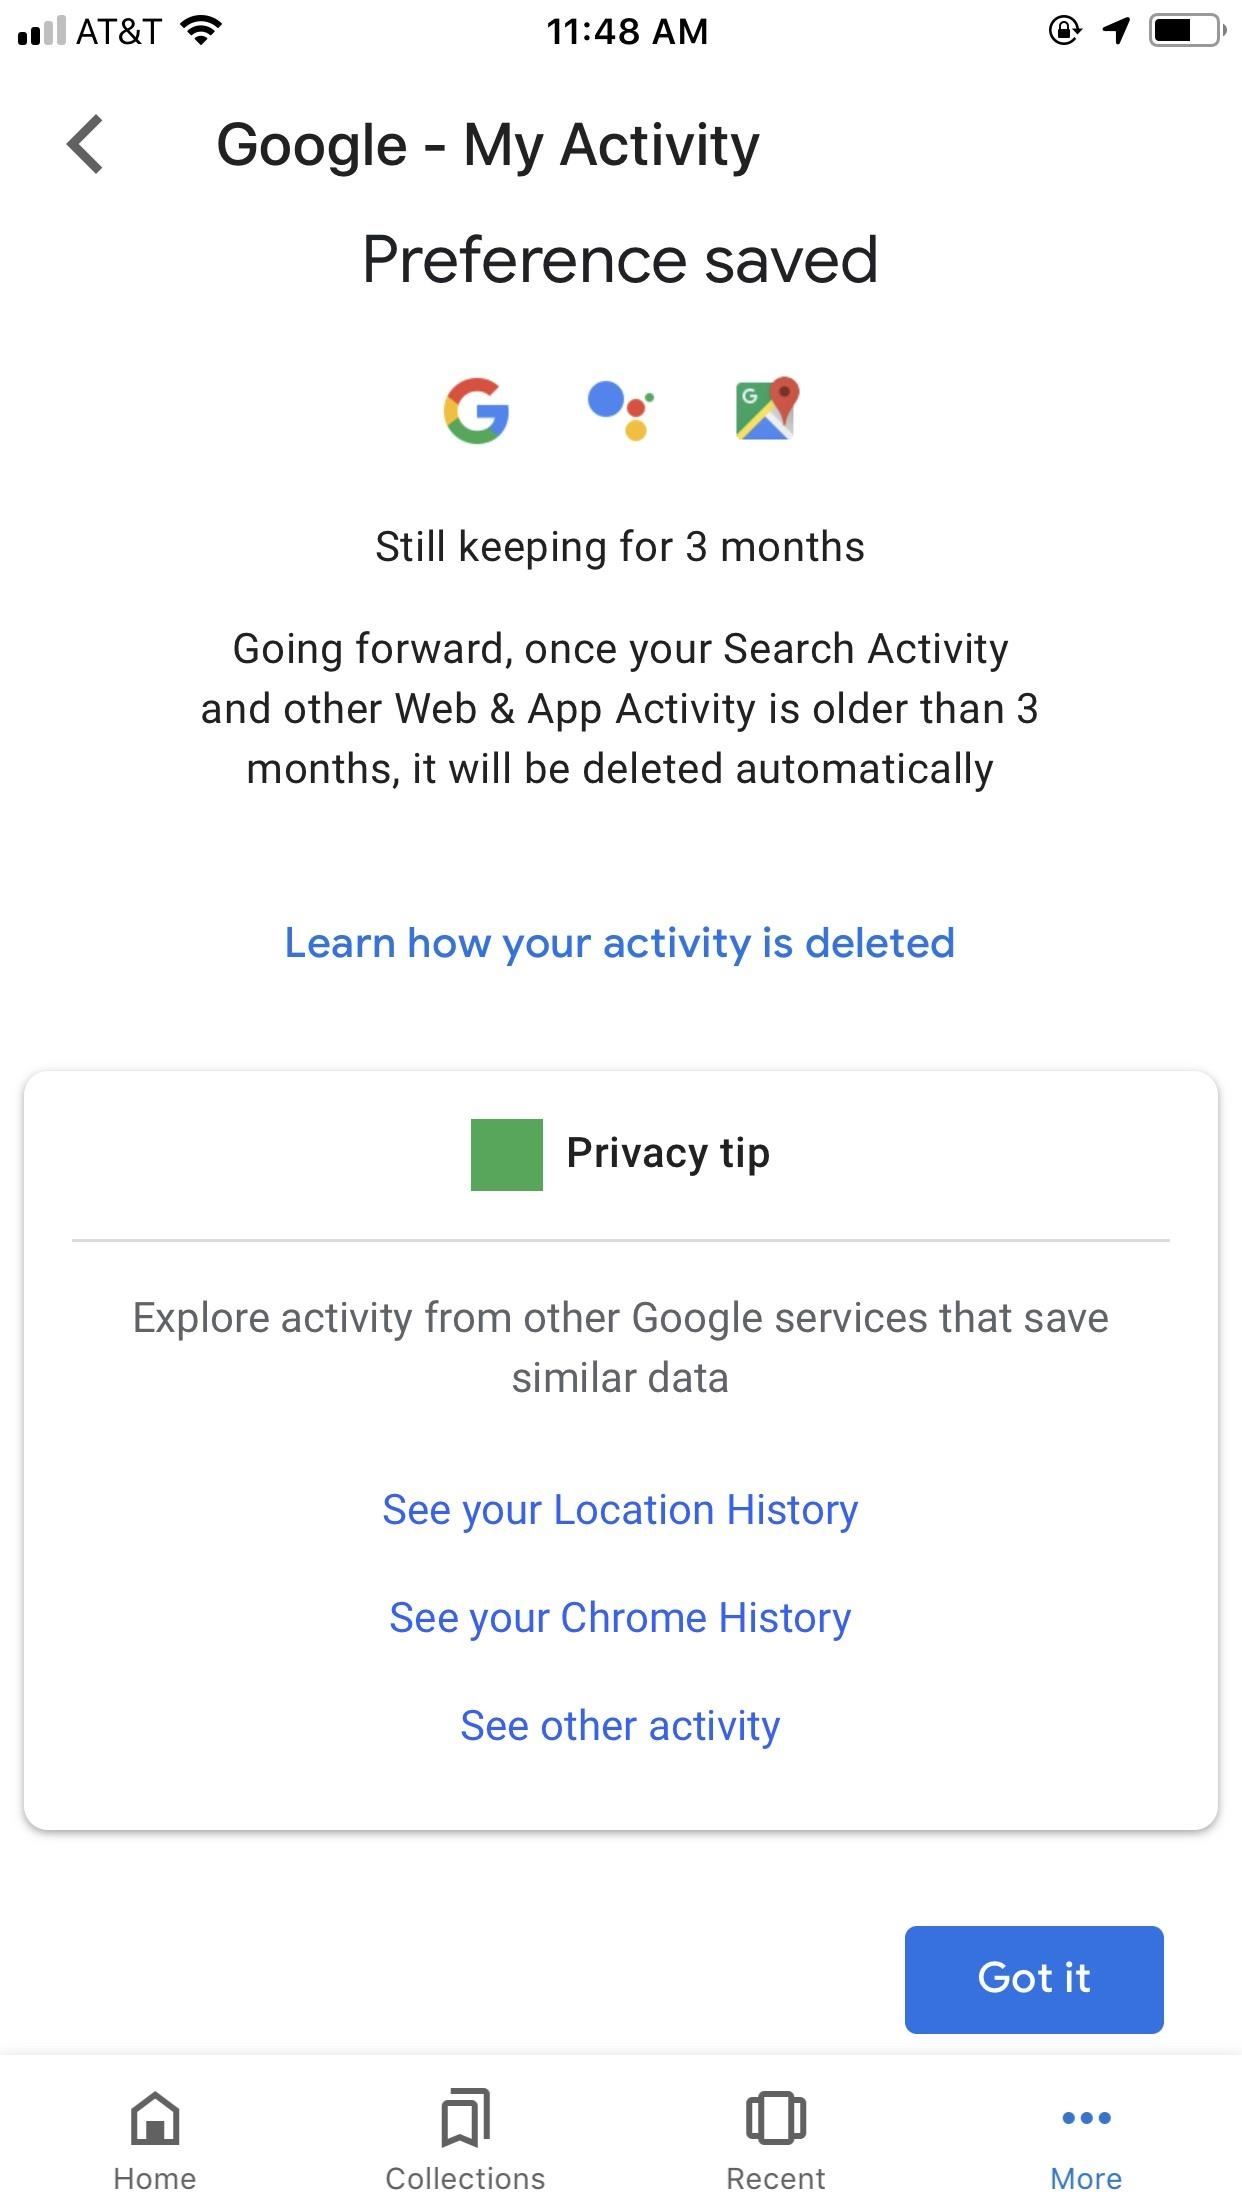 How to Automatically Delete Your Google History on a Schedule